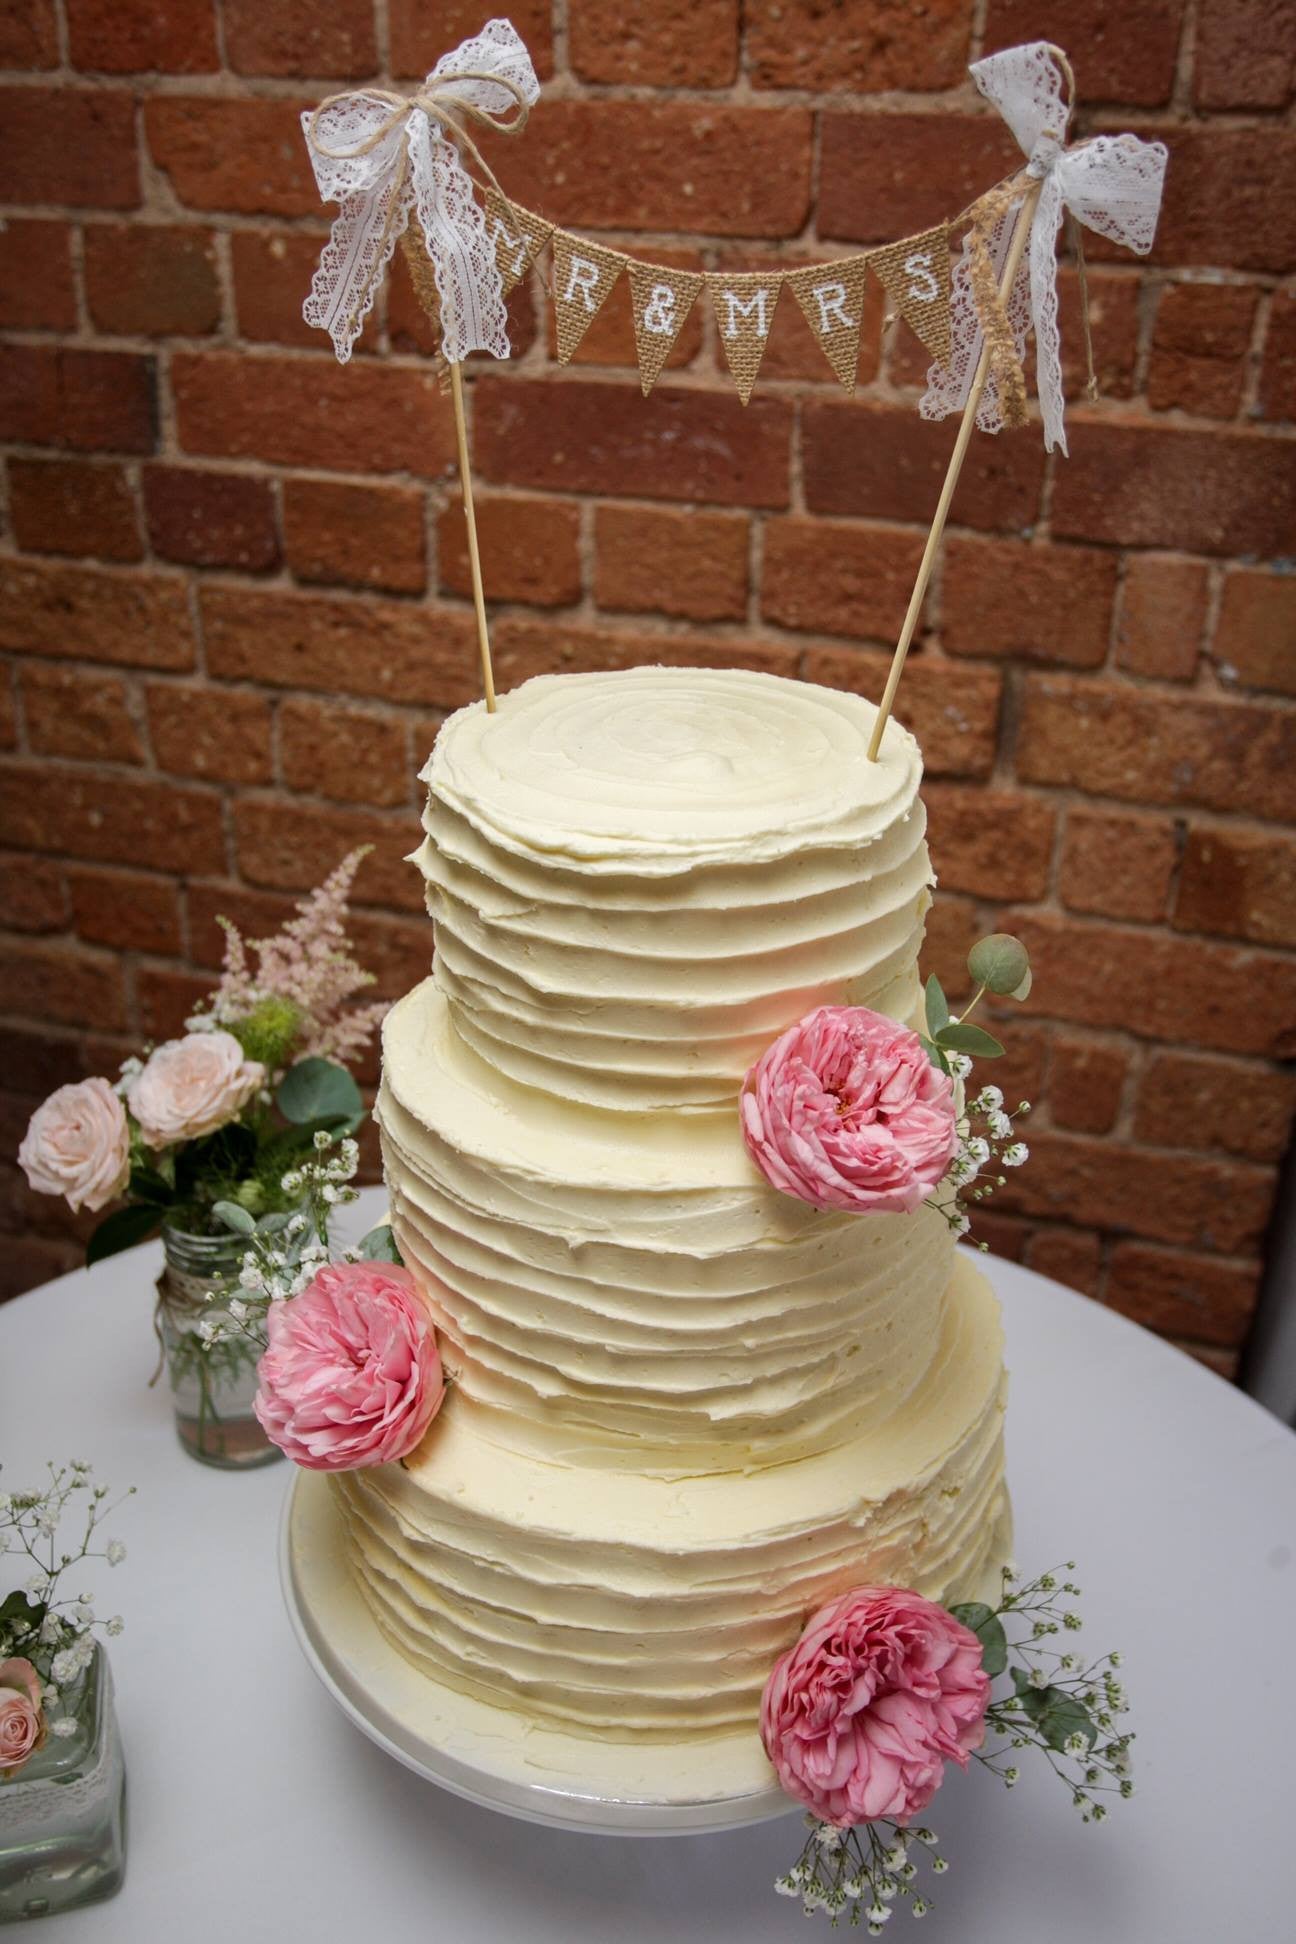 Natural style wedding cake with pink Peony decoration.